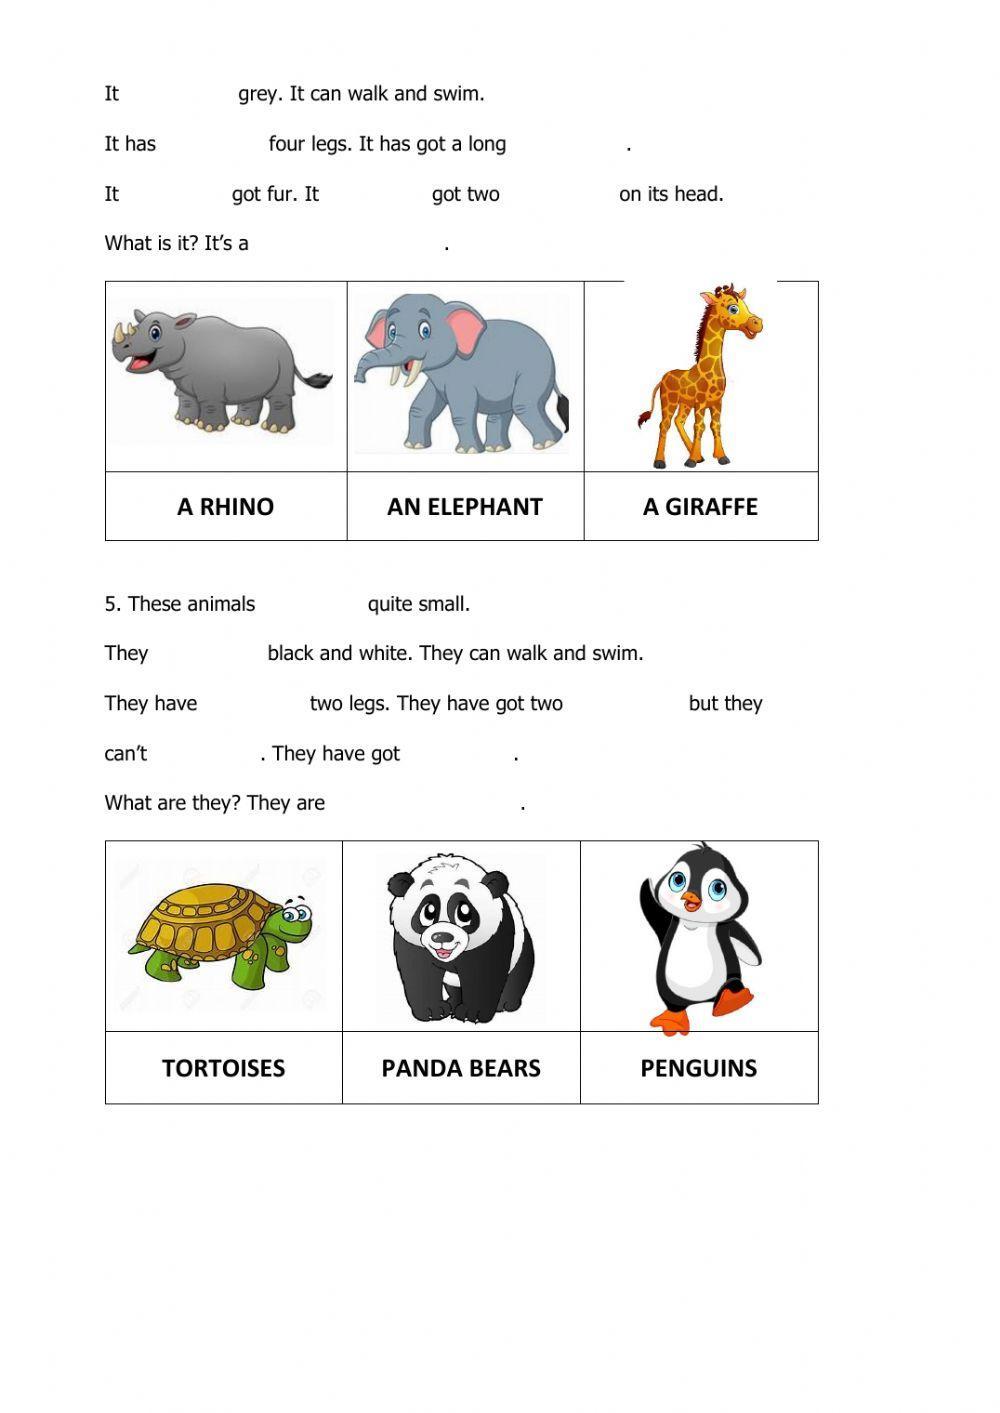 Riddles with animals